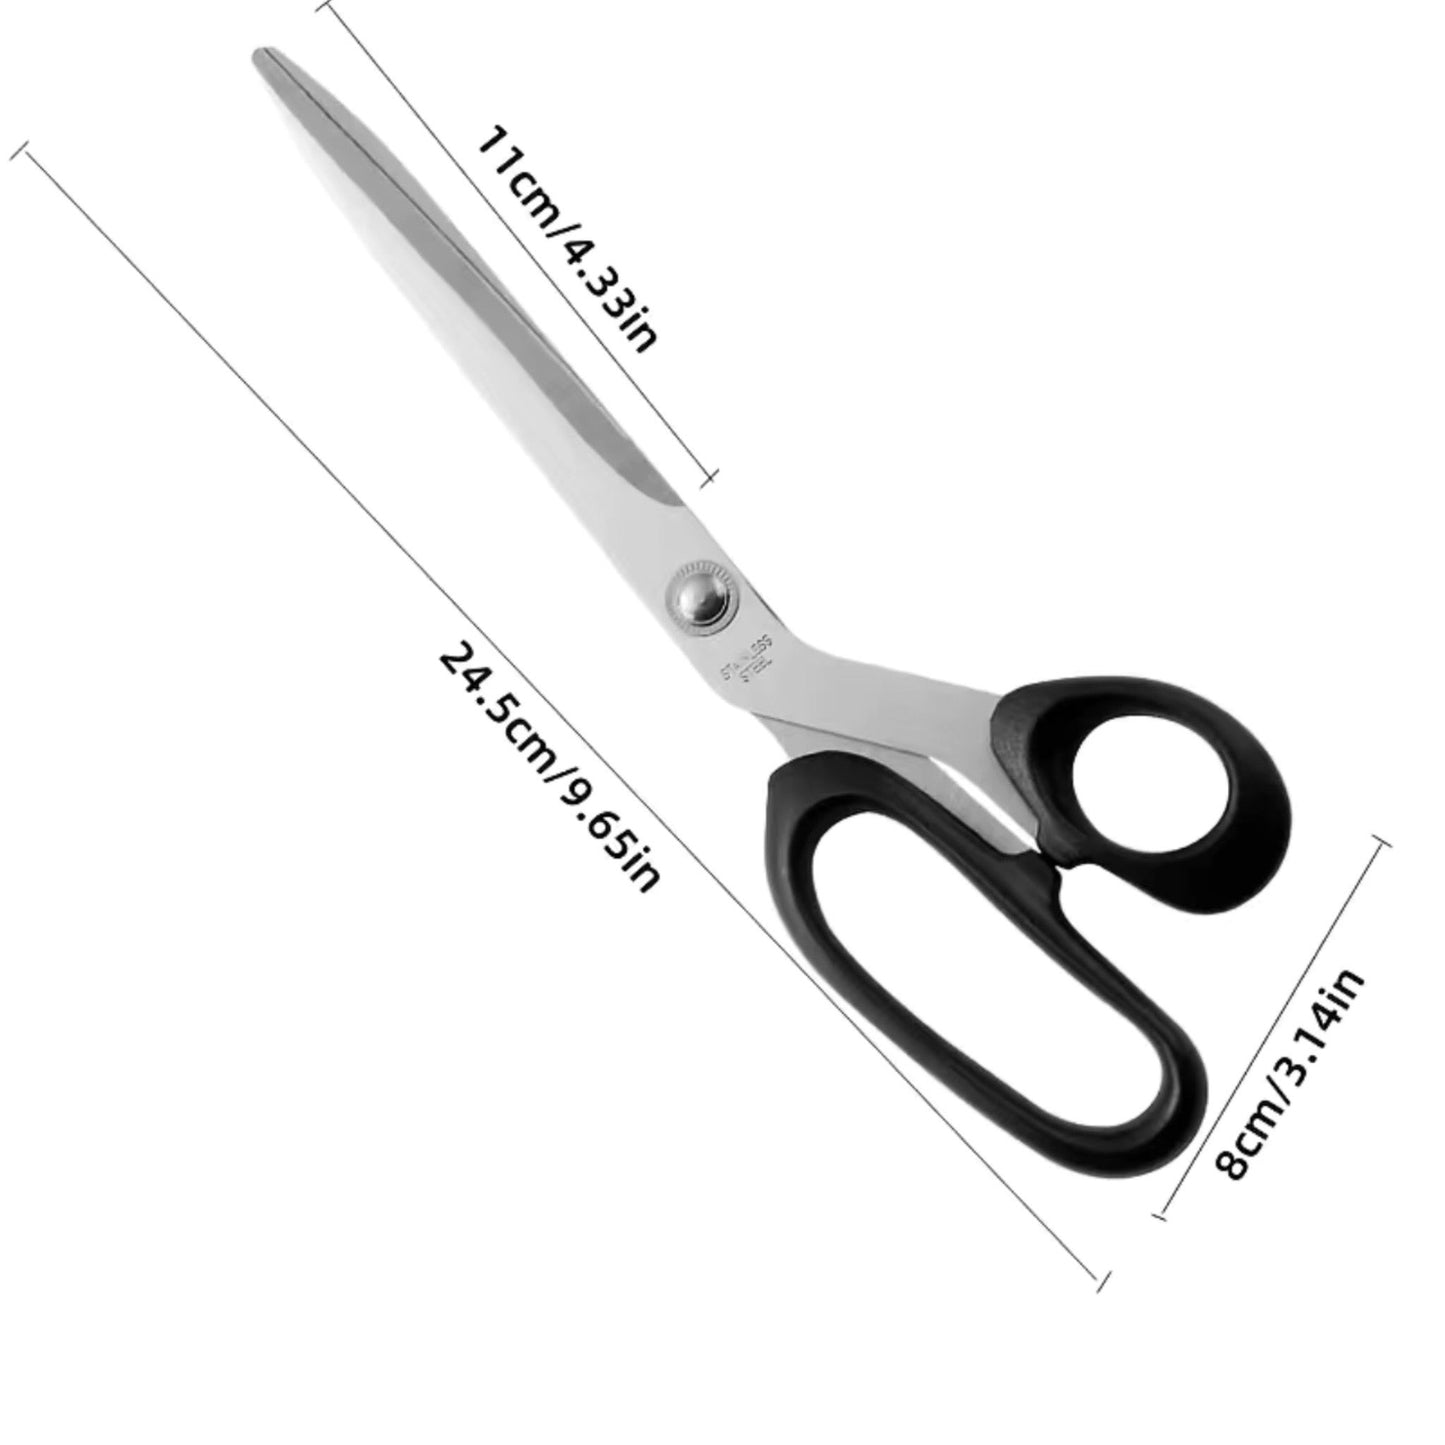 One Pair Of Professional Sewing Scissors, Stainless Steel Tailor Shear, Fabric Cutting Scissors, Dressmaker Tailor Scissors